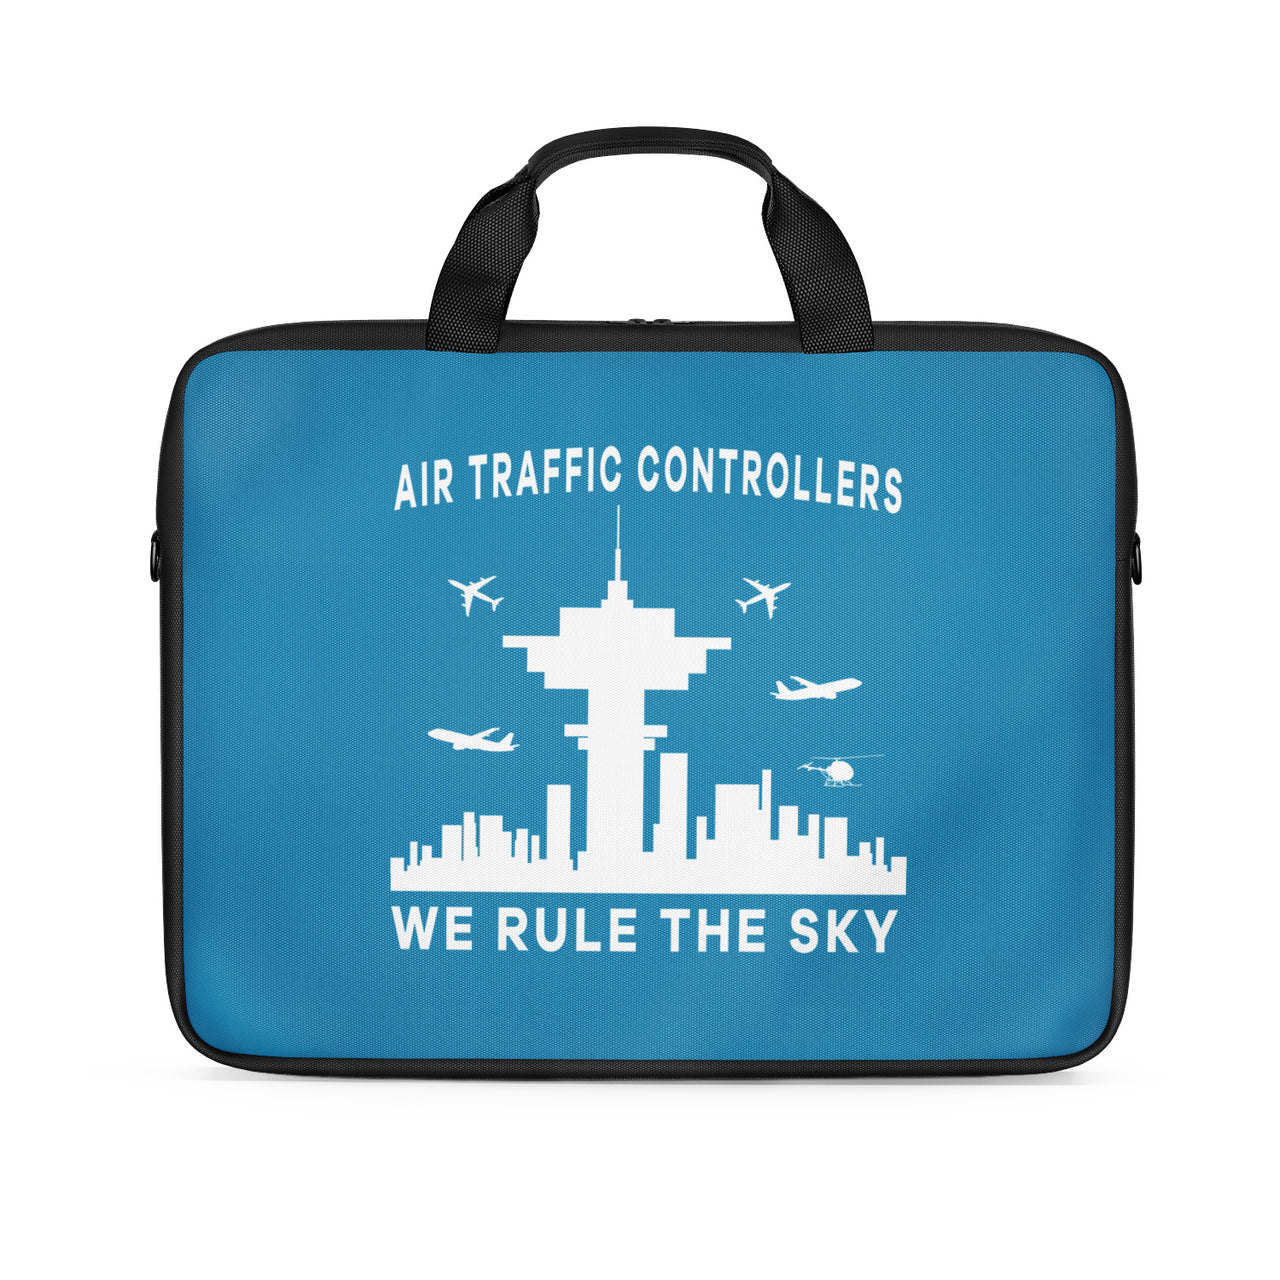 Air Traffic Controllers - We Rule The Sky Designed Laptop & Tablet Bags